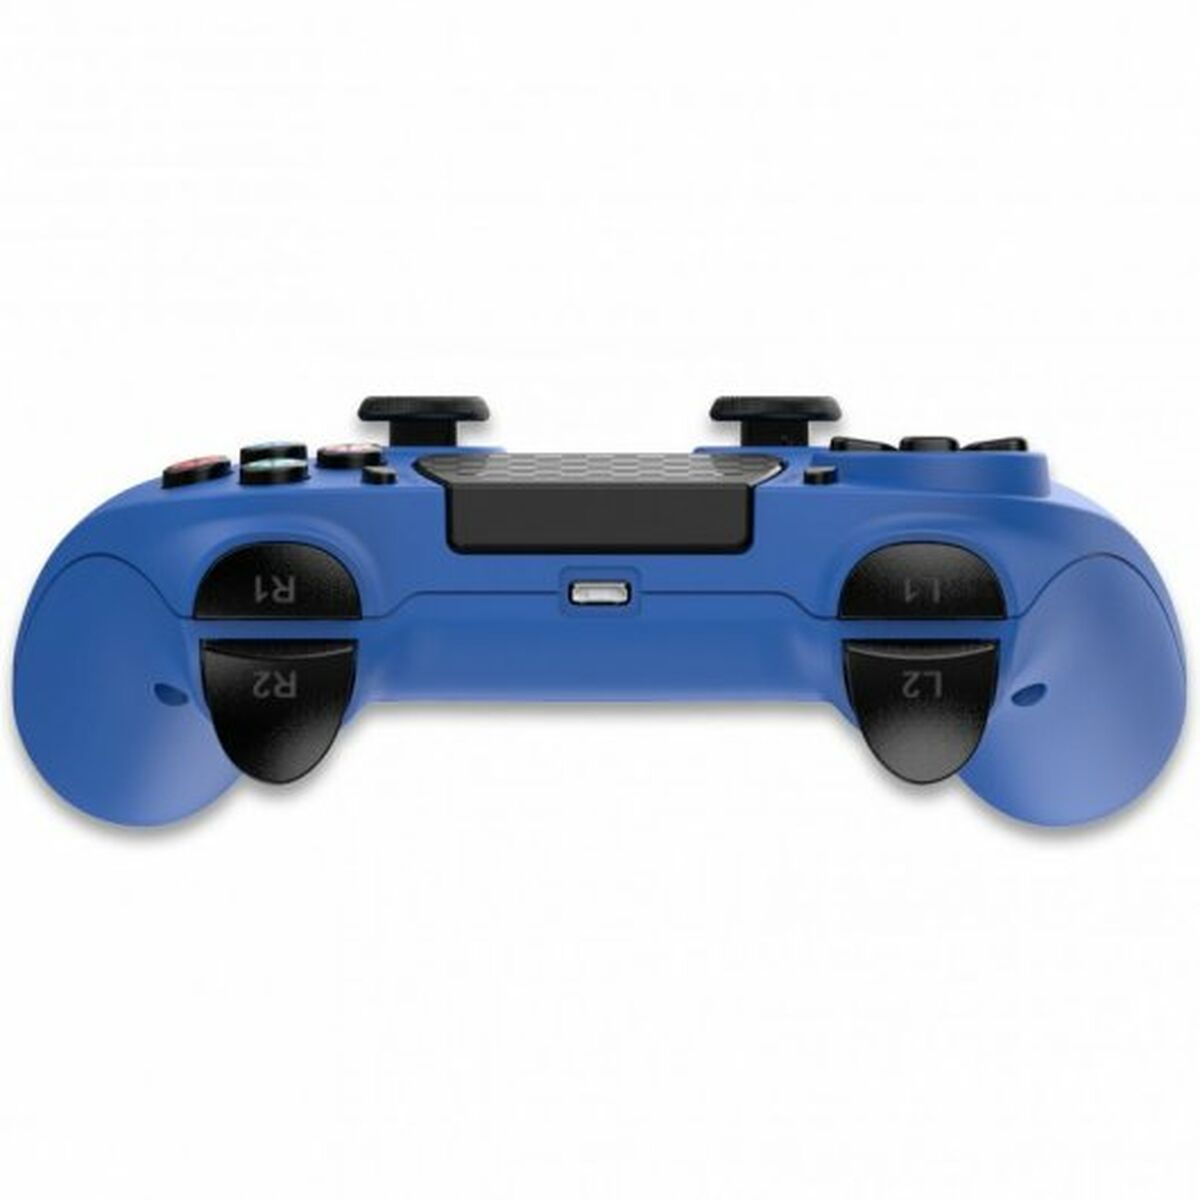 Trade Invaders PS4 Wireless Gaming Control